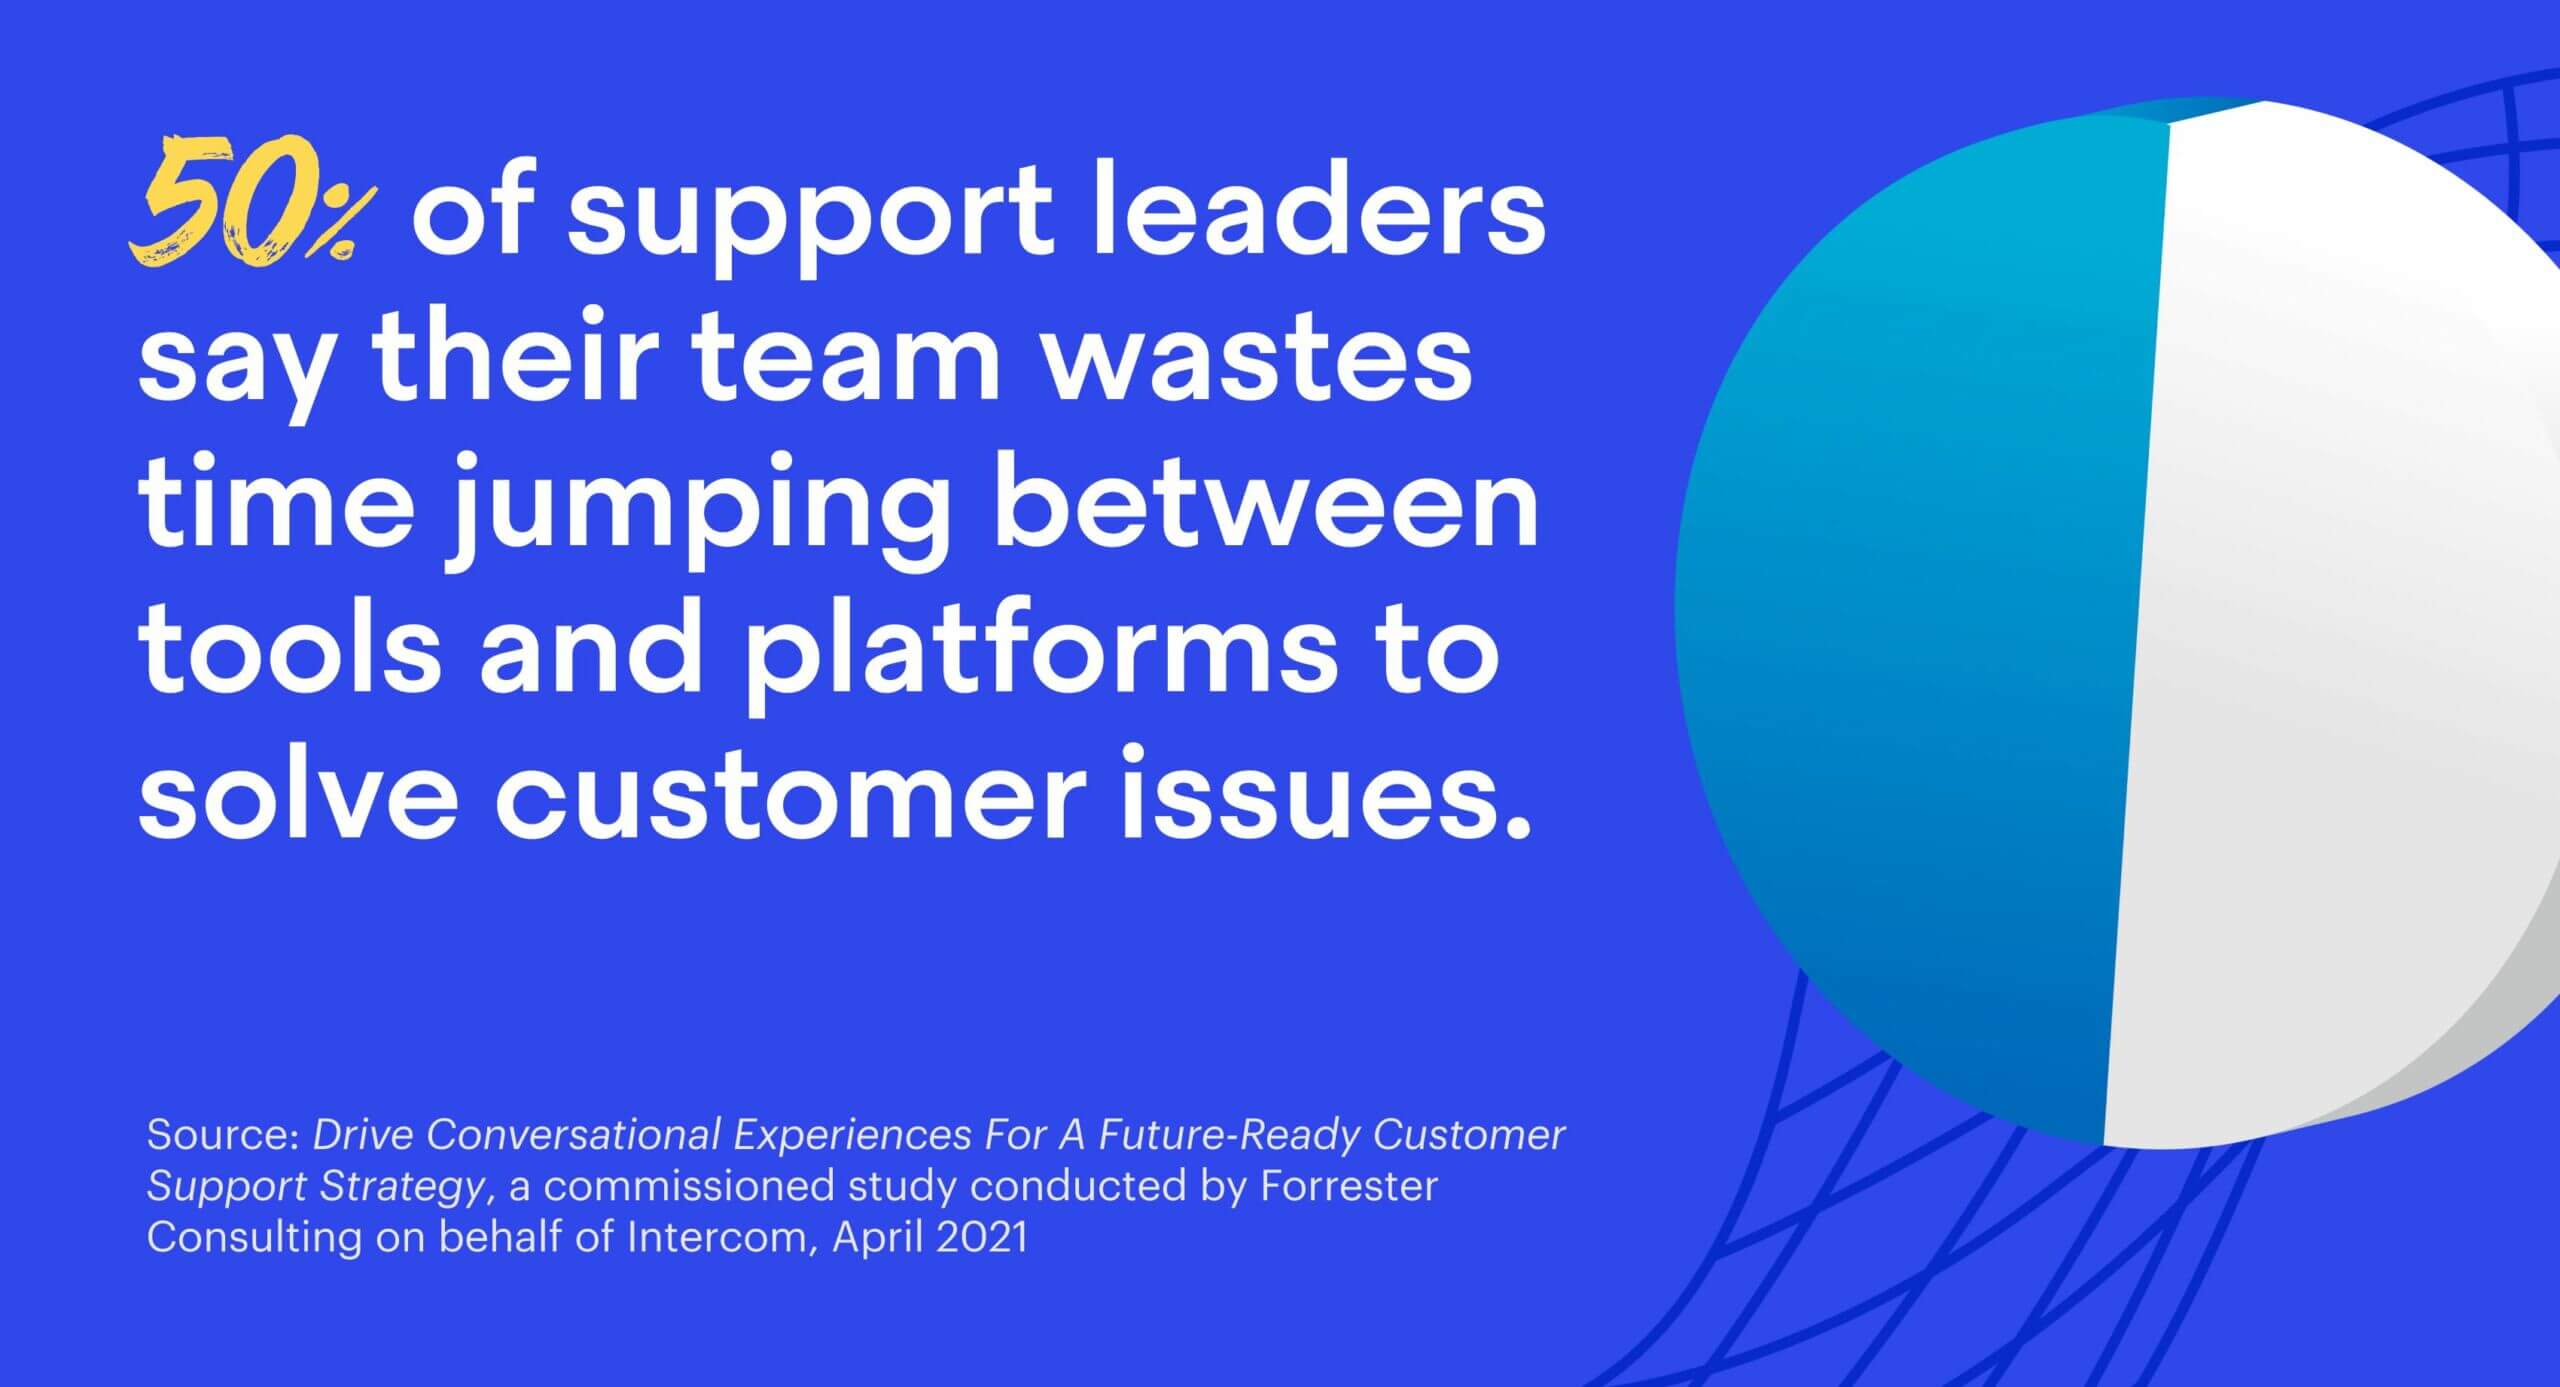 50% of support leaders say their team wastes time jumping between tools and platforms to solve customer issues.